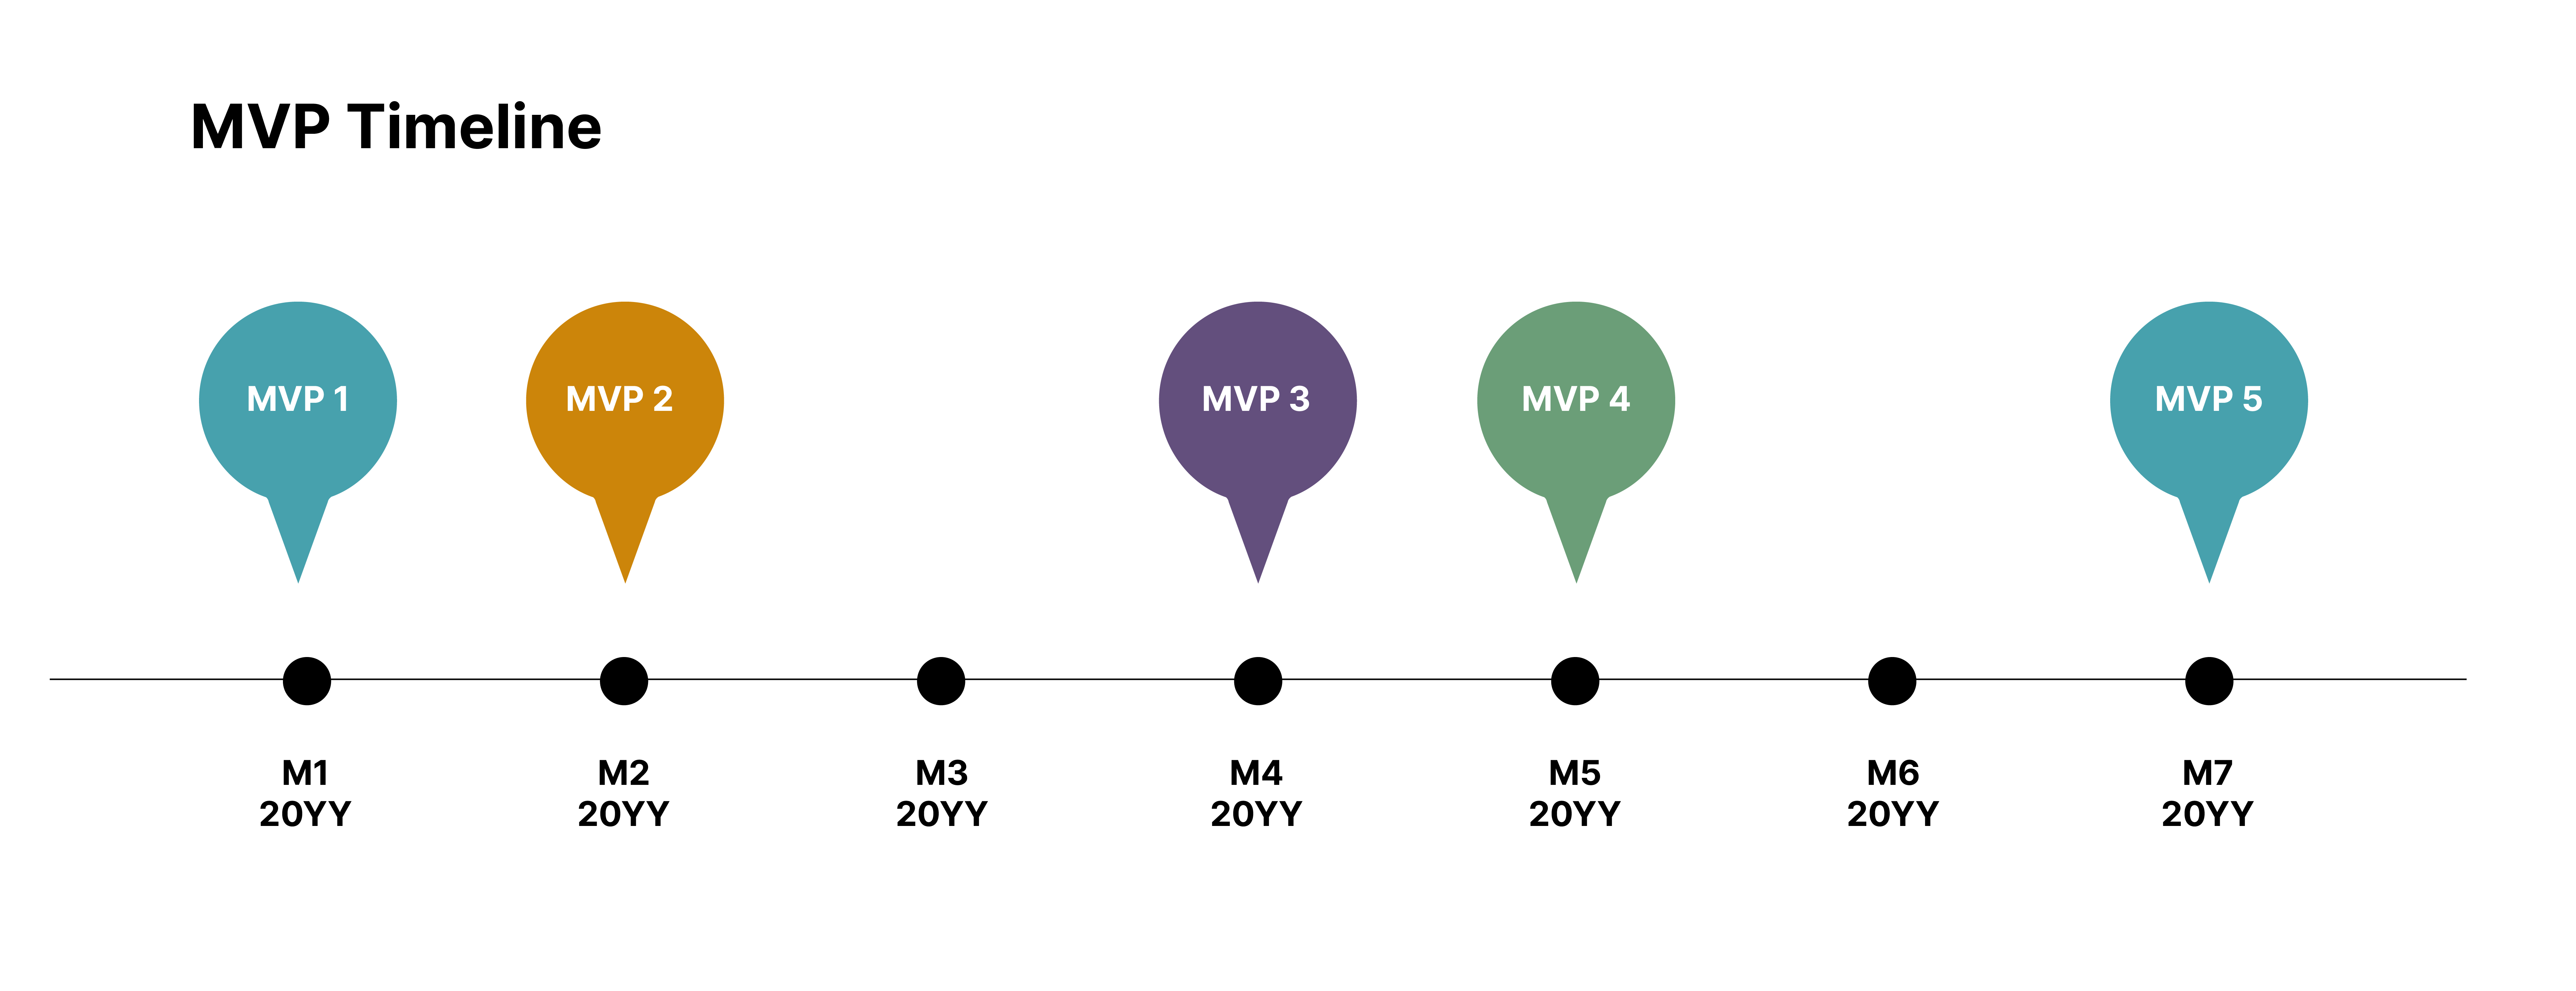 An MVP timeline: releases are staged across staggered months throughout the year